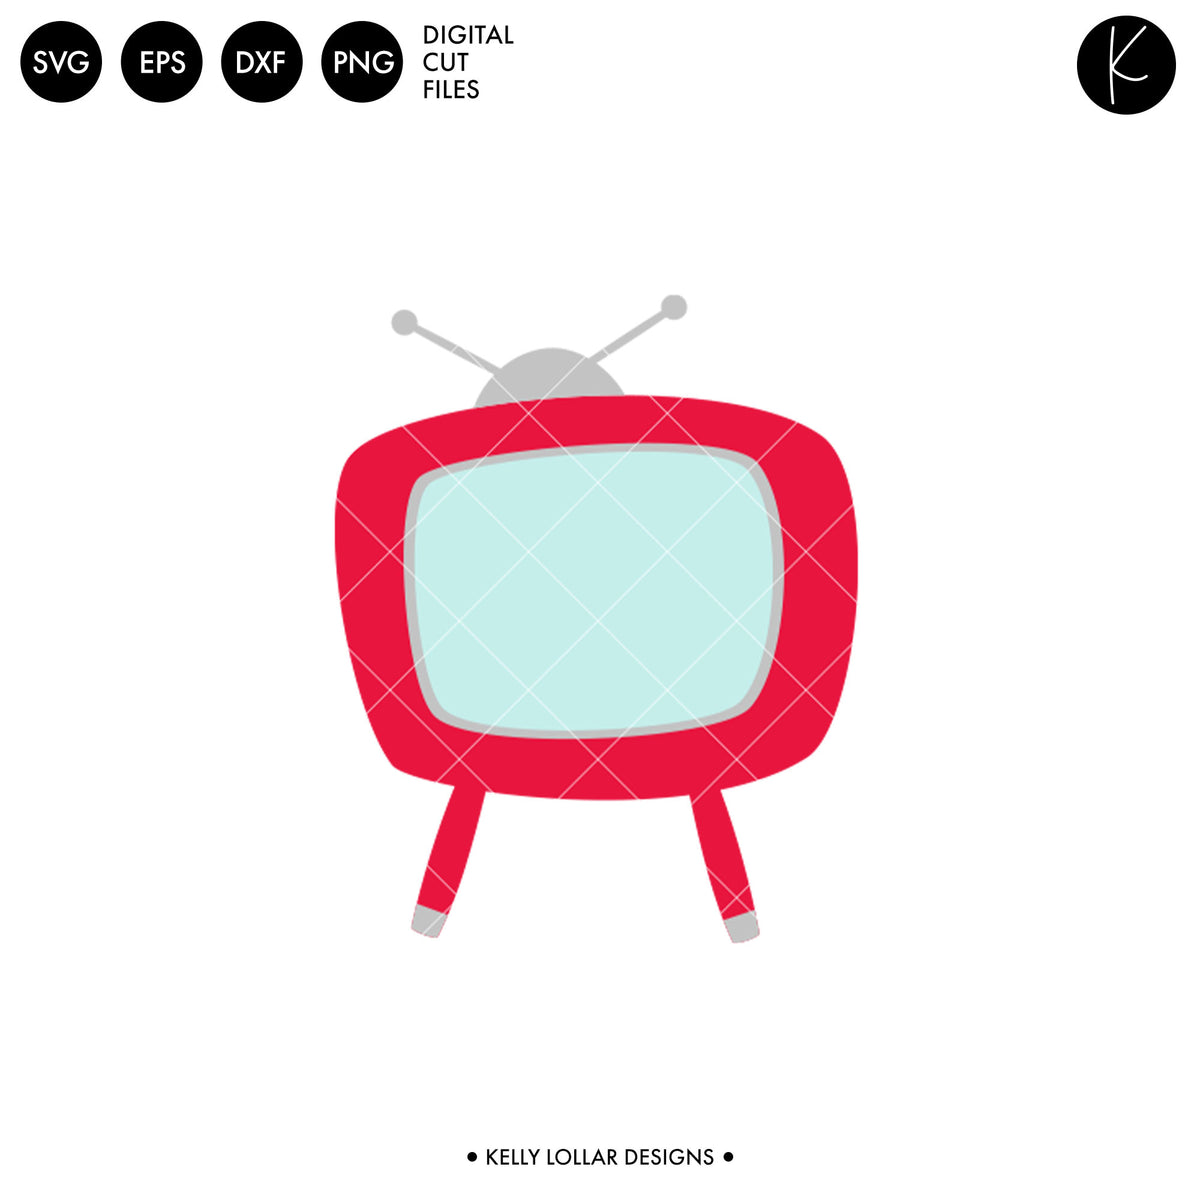 Retro TV | SVG DXF EPS PNG Cut Files